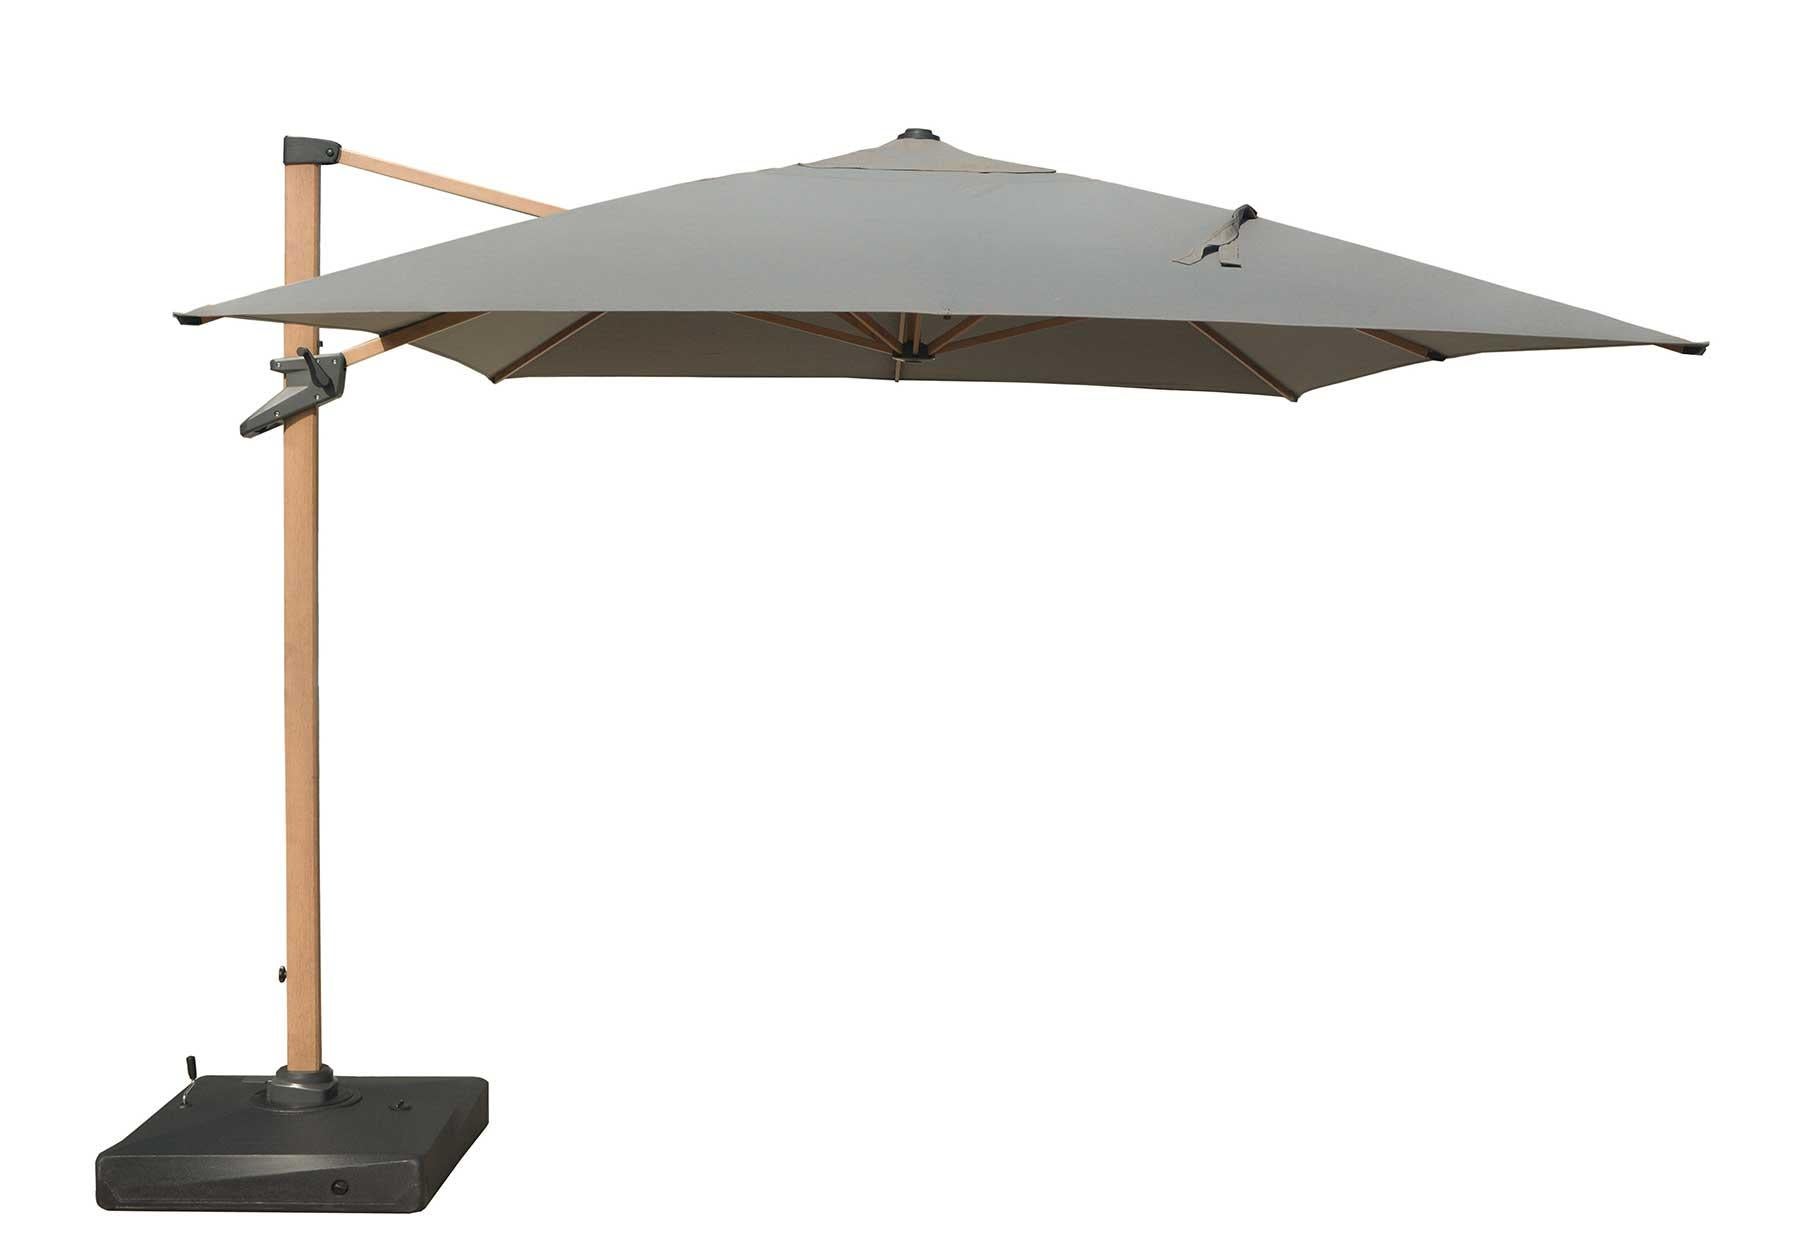 Claude Beige XL Umbrella by Snoc In New Condition For Sale In Yukarıdudullu, 34